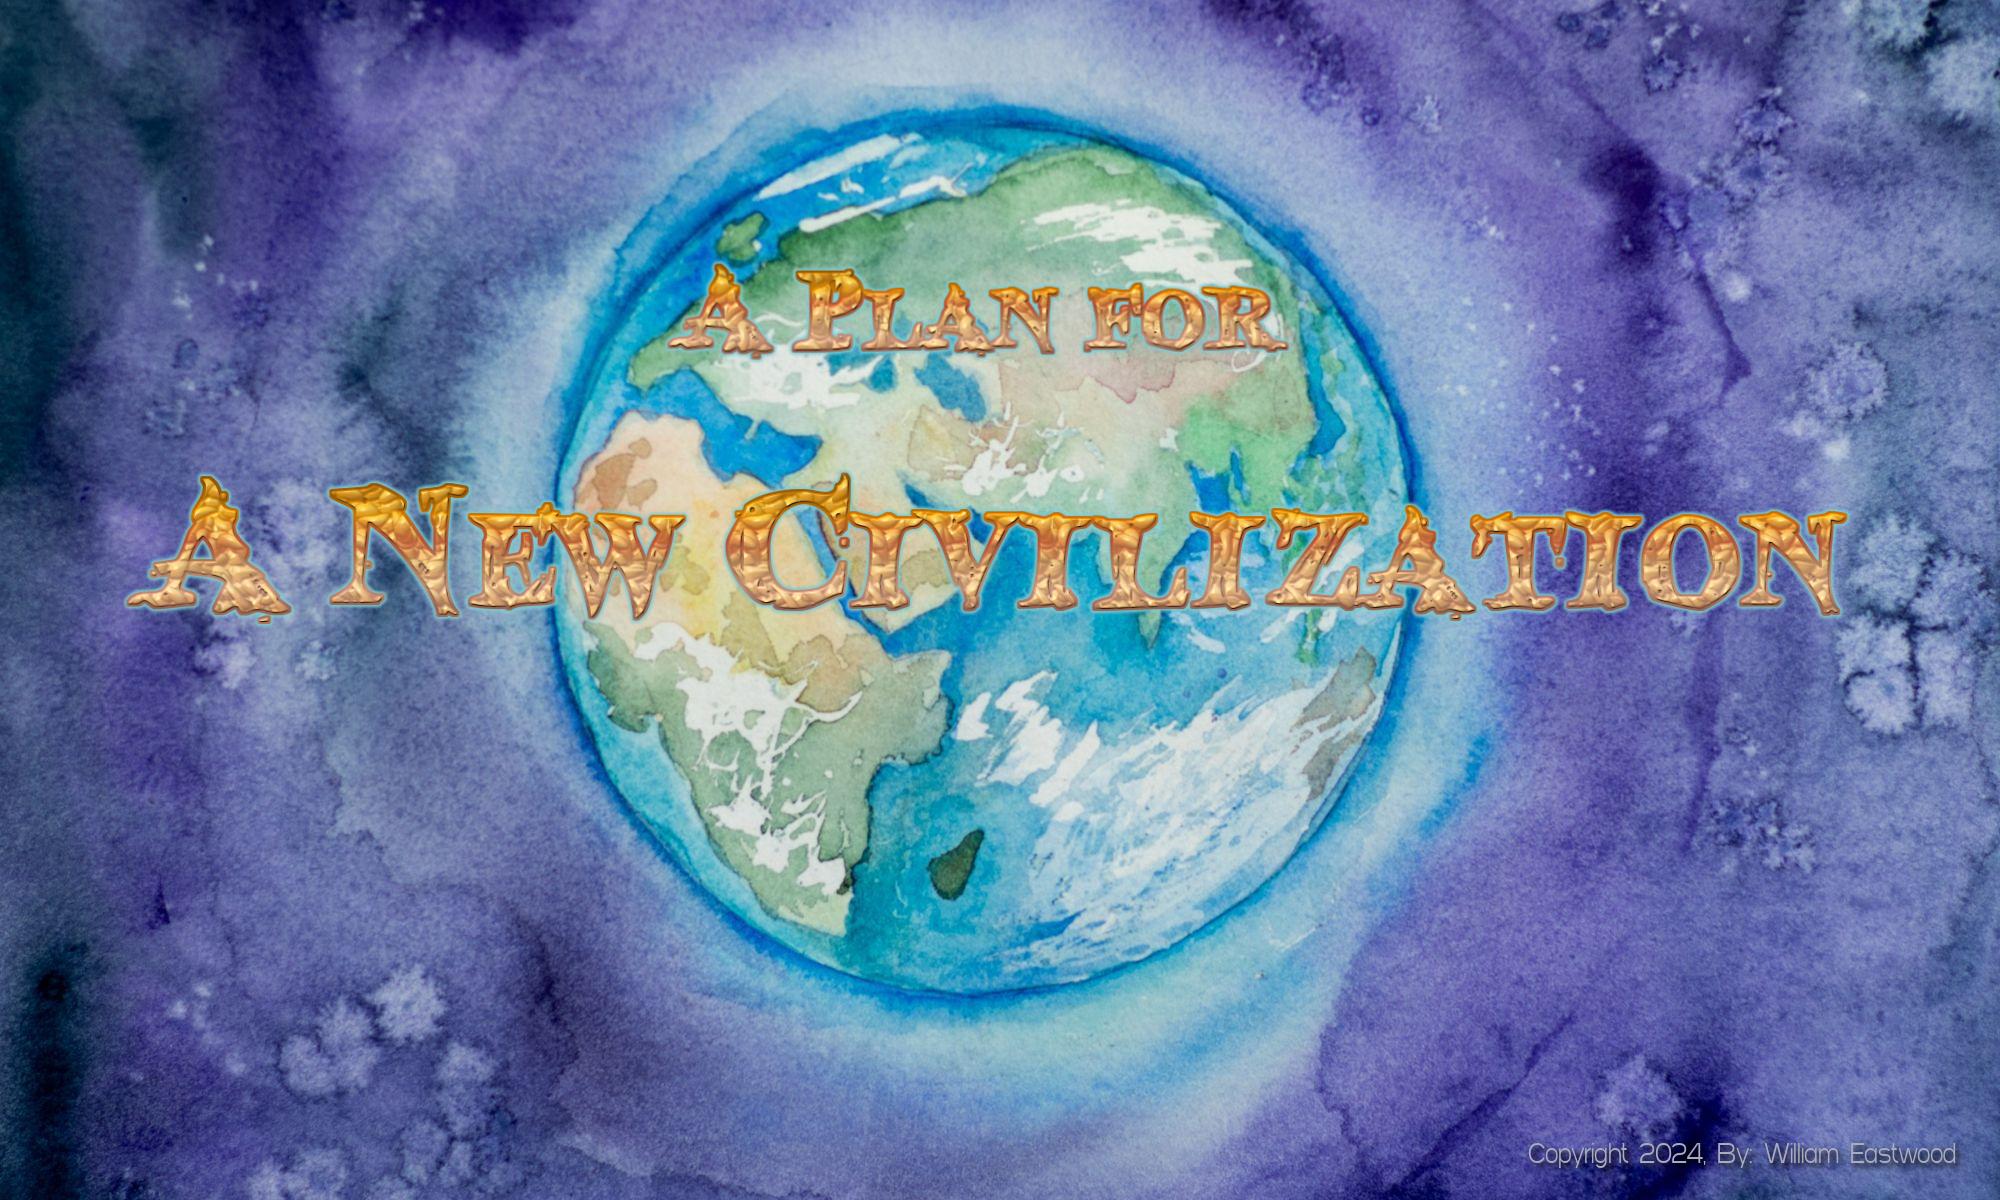 A Plan for a New Civilization Based on Internal Science & International Philosophy by William Eastwood & EN